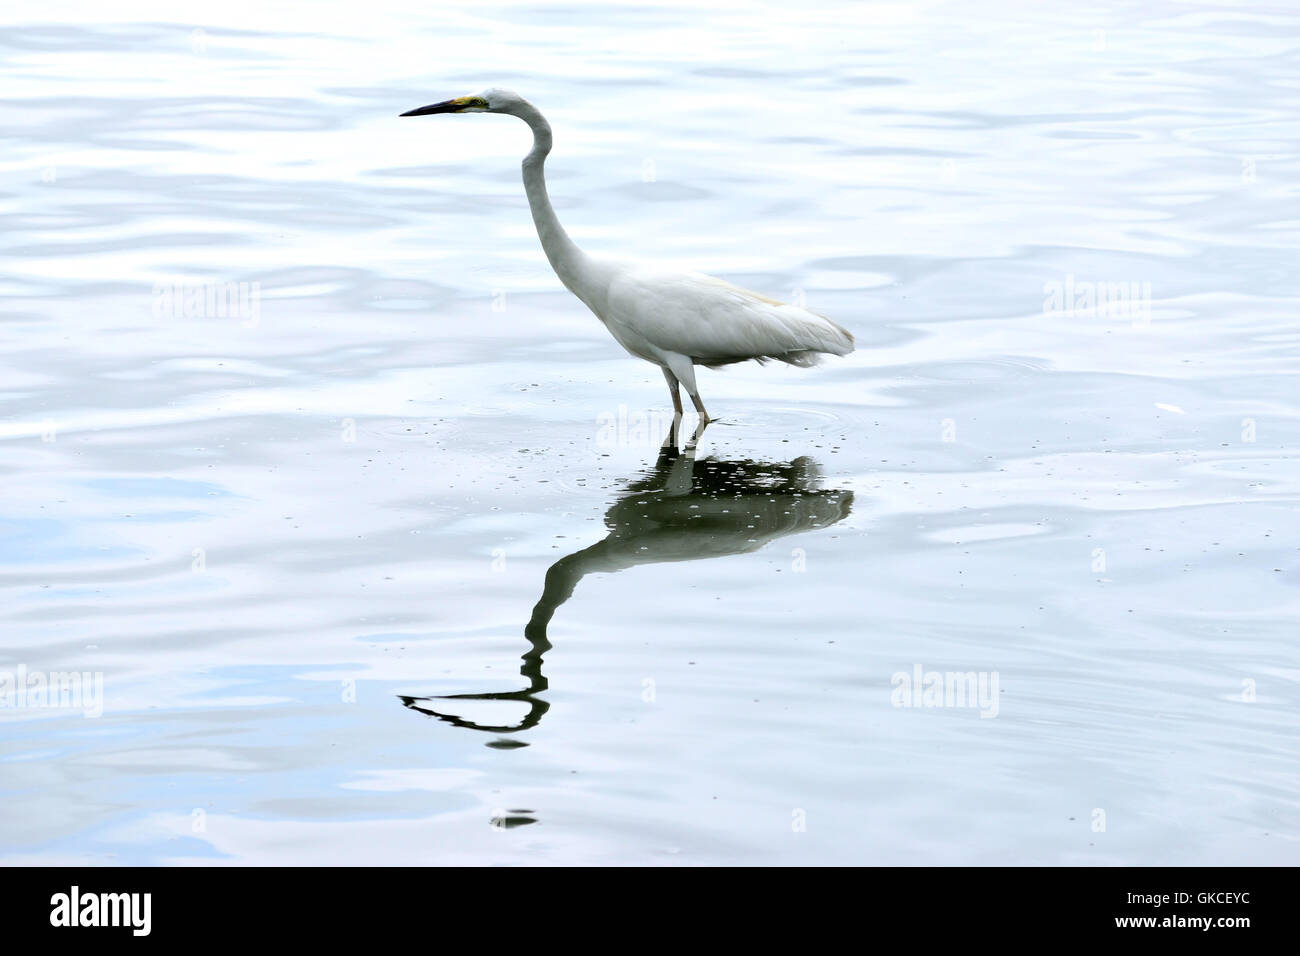 A bird wading through water looking for food and his reflection Stock Photo